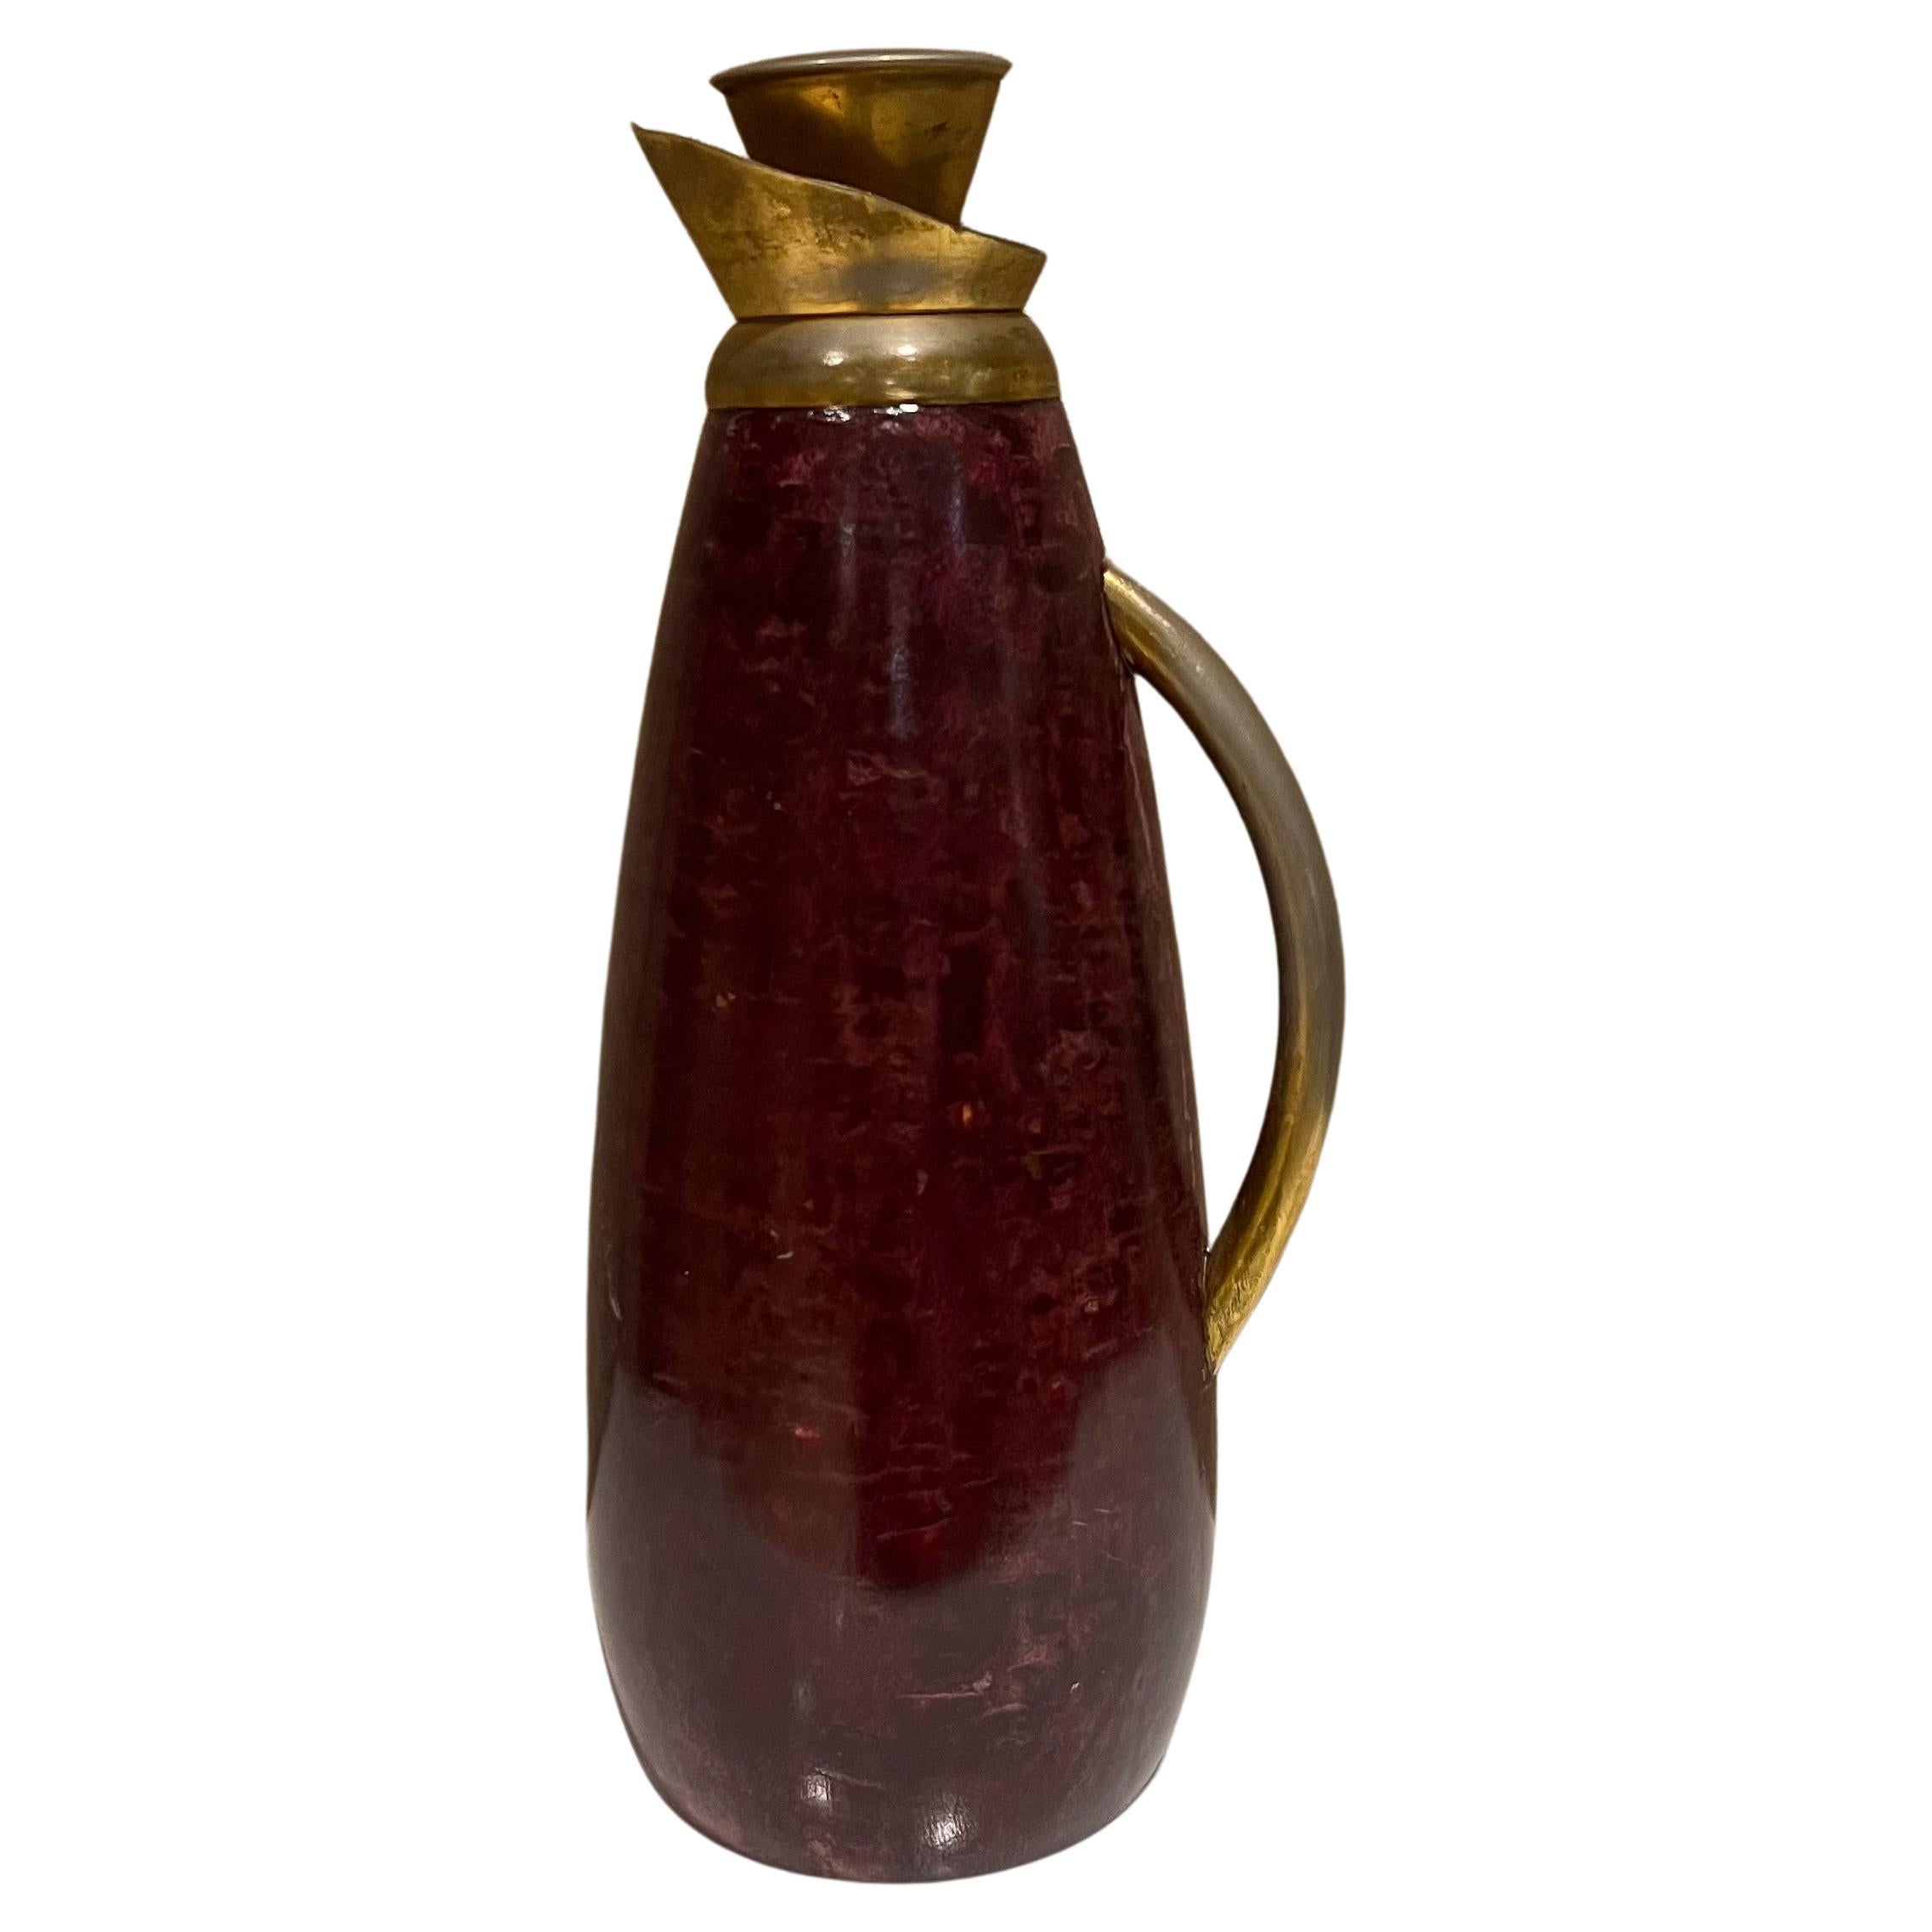 Pitcher Aldo Tura
Italy 1960s Aldo Tura vintage pitcher carafe in purple wine parchment goatskin
Handle and cork stopper in brass plated metal. 
Label from the maker. 
Measures: 14.25 tall x 6.5 wide x 4.75 diameter
Please expect preowned